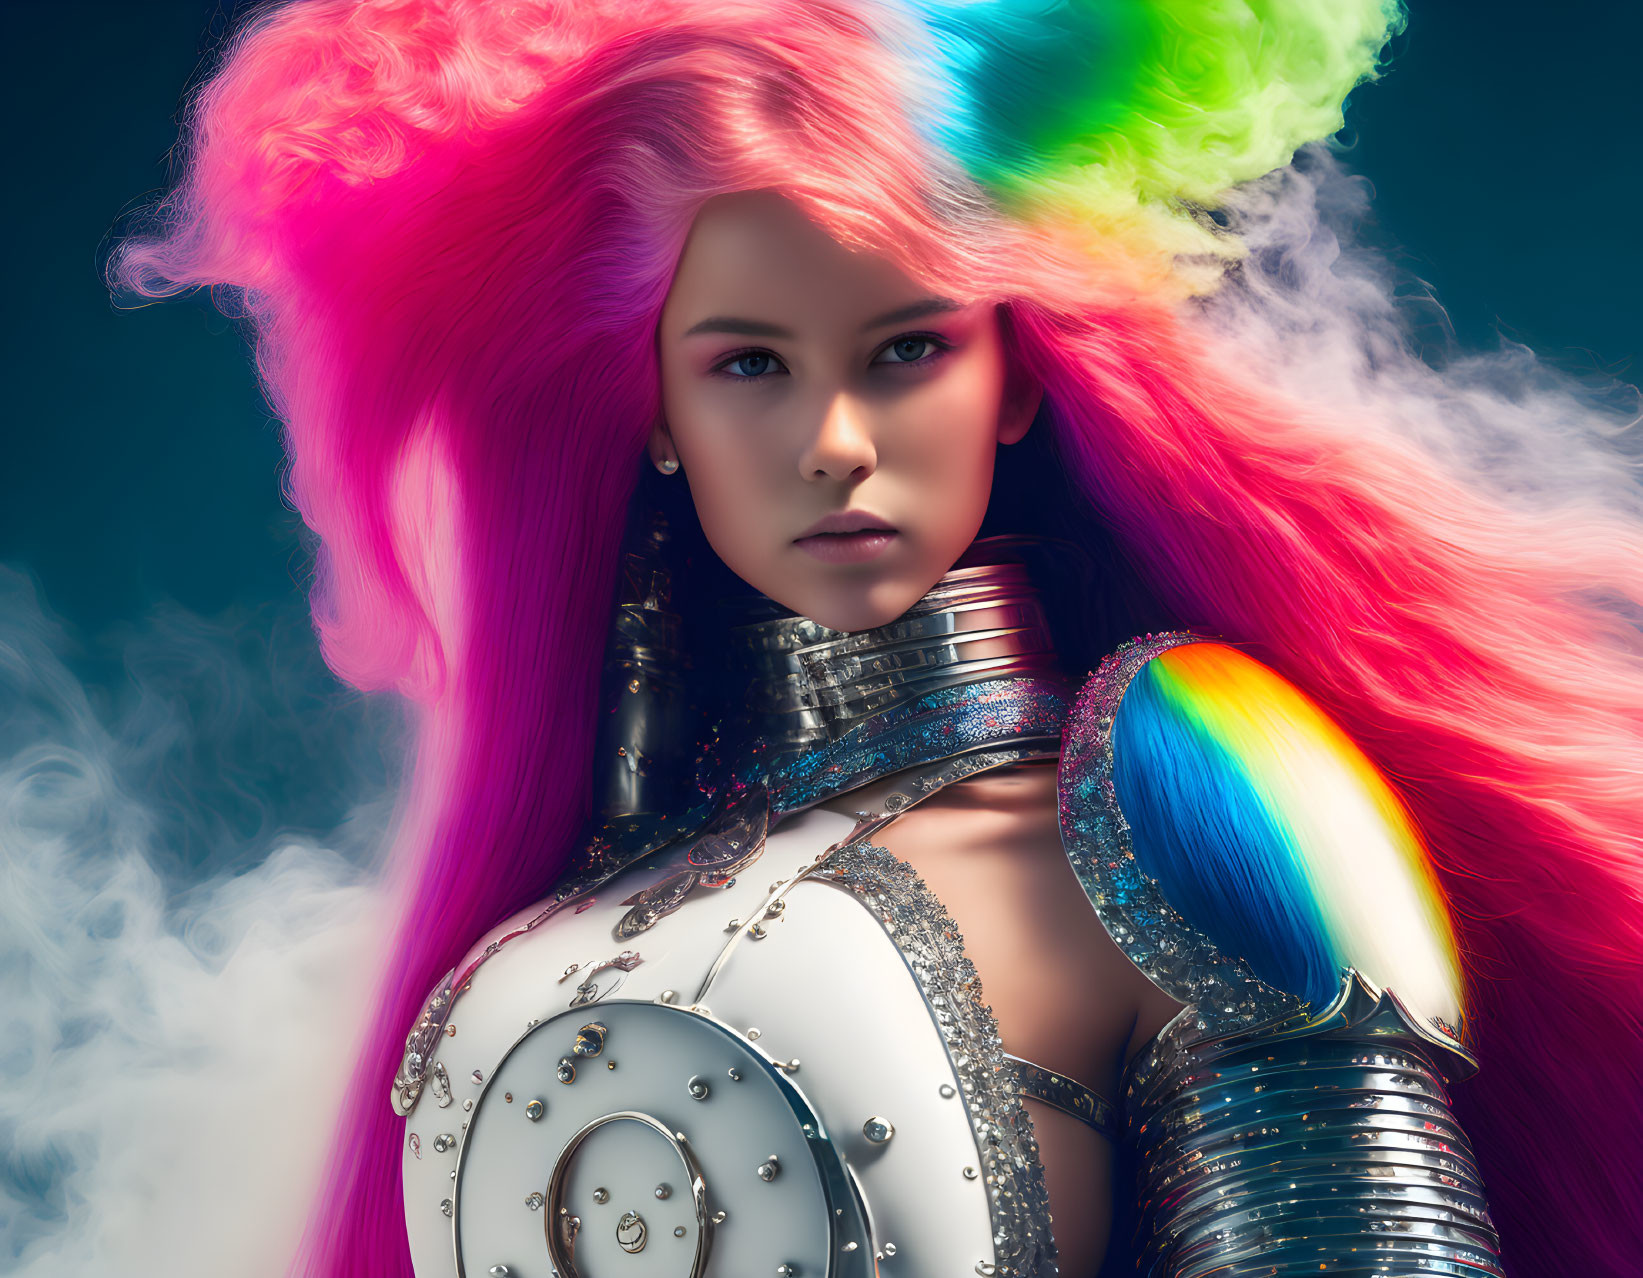 Futuristic woman with multicolored hair and metallic armor on blue background